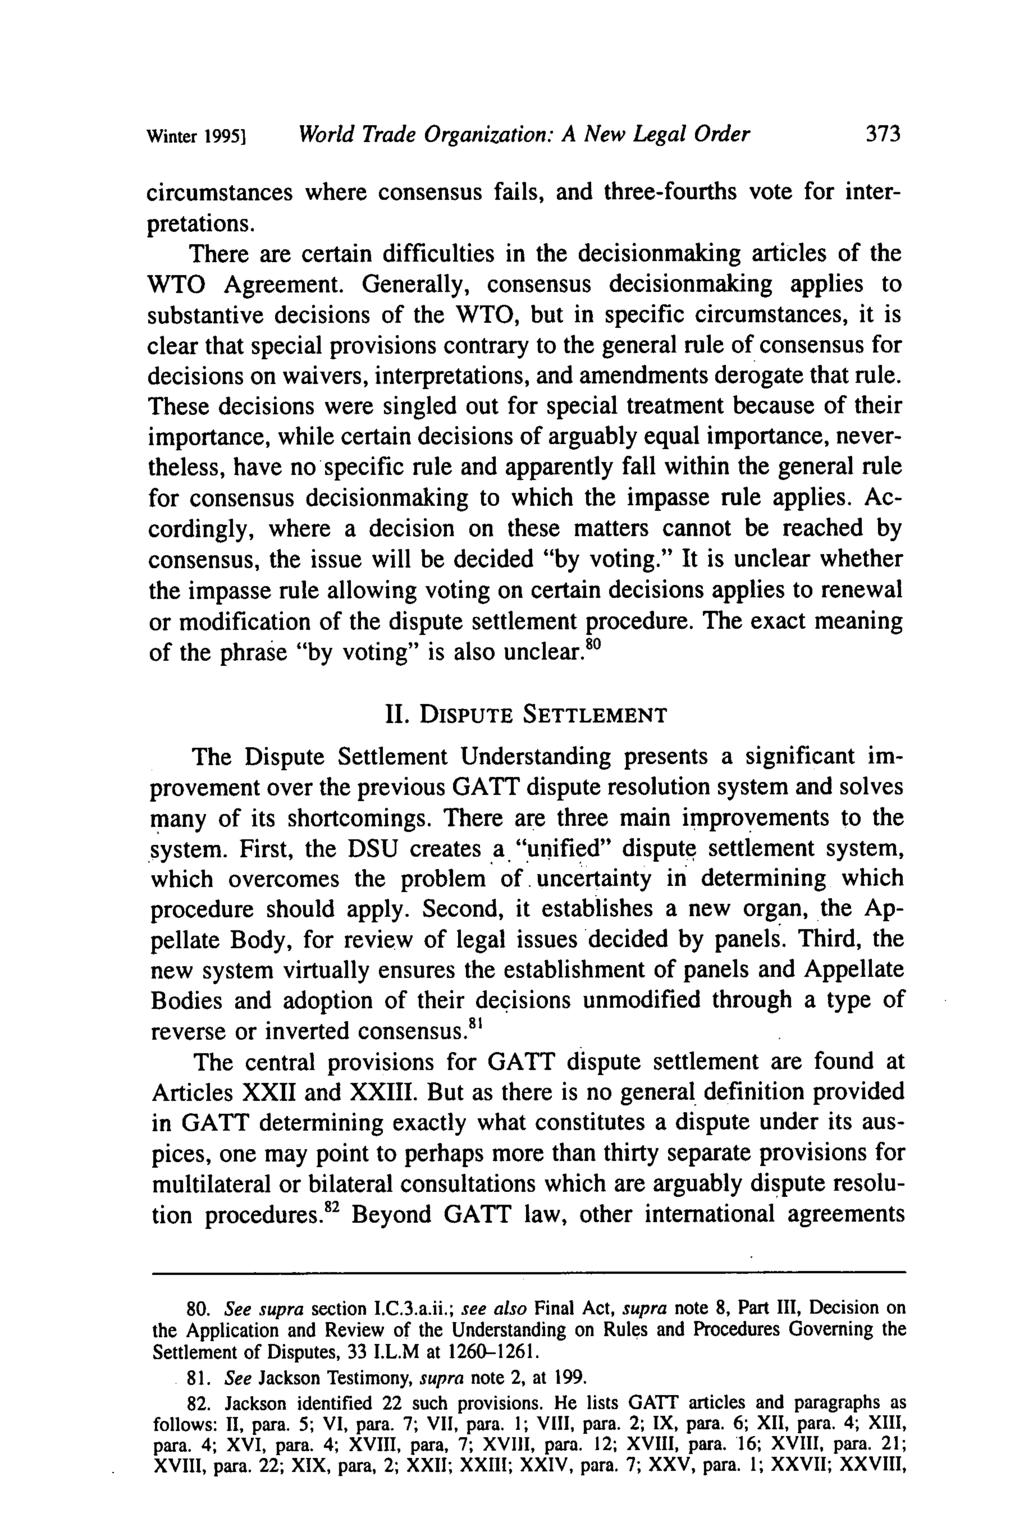 Winter 1995] World Trade Organization: A New Legal Order circumstances where consensus fails, and three-fourths vote for interpretations.